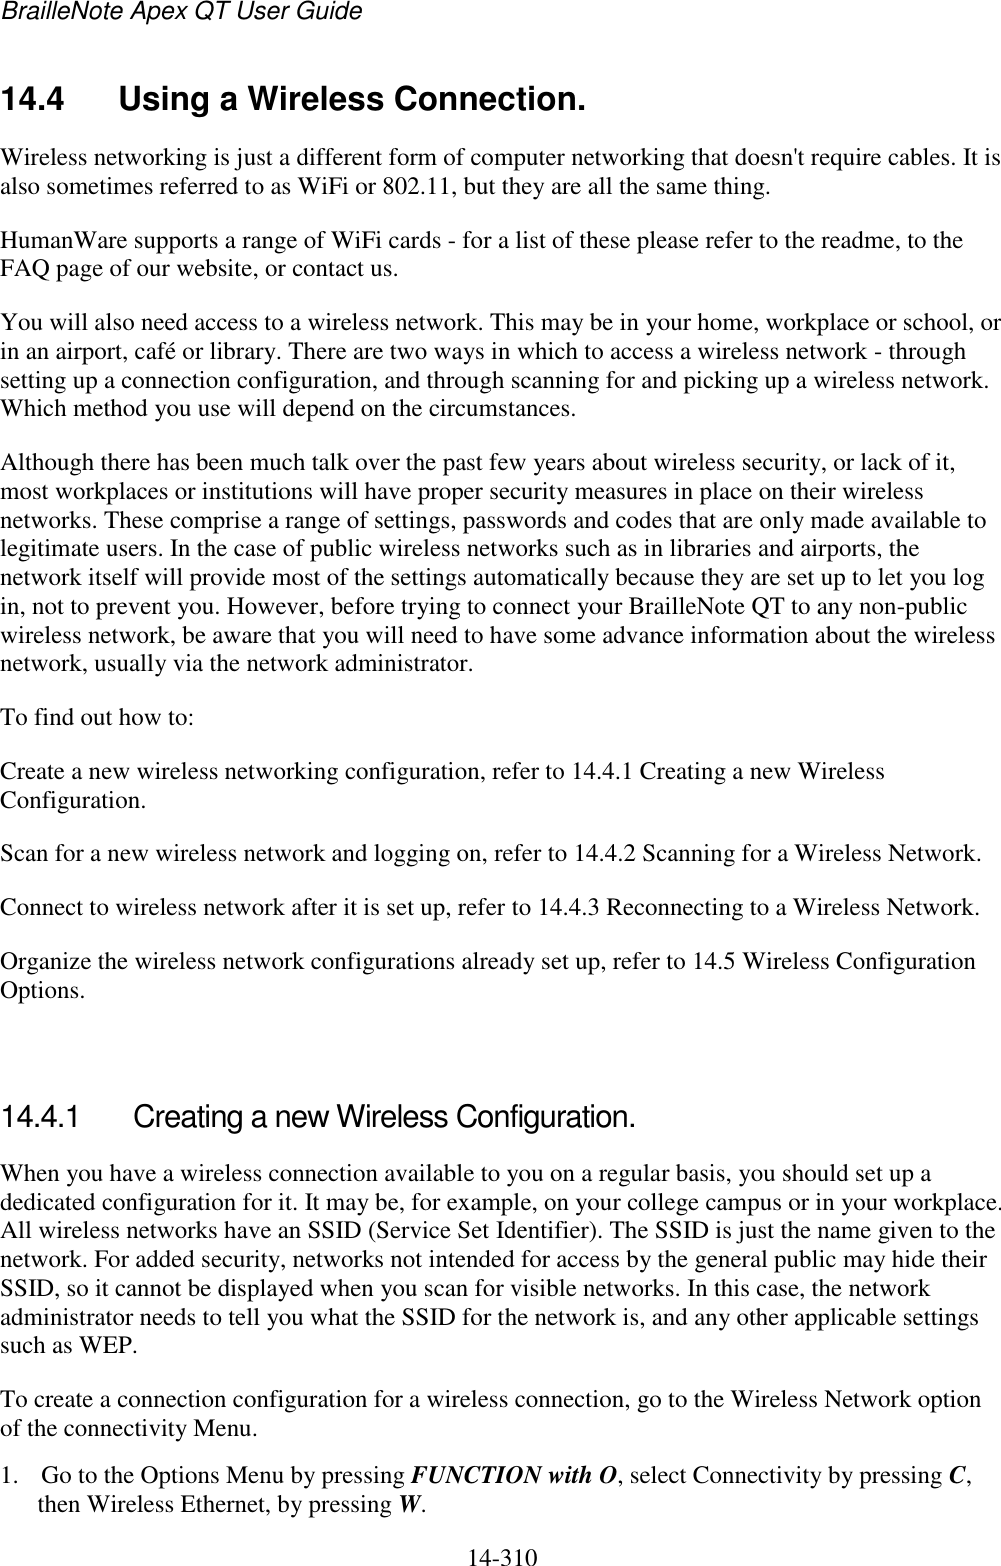 BrailleNote Apex QT User Guide  14-310   14.4  Using a Wireless Connection. Wireless networking is just a different form of computer networking that doesn&apos;t require cables. It is also sometimes referred to as WiFi or 802.11, but they are all the same thing. HumanWare supports a range of WiFi cards - for a list of these please refer to the readme, to the FAQ page of our website, or contact us.  You will also need access to a wireless network. This may be in your home, workplace or school, or in an airport, café or library. There are two ways in which to access a wireless network - through setting up a connection configuration, and through scanning for and picking up a wireless network. Which method you use will depend on the circumstances. Although there has been much talk over the past few years about wireless security, or lack of it, most workplaces or institutions will have proper security measures in place on their wireless networks. These comprise a range of settings, passwords and codes that are only made available to legitimate users. In the case of public wireless networks such as in libraries and airports, the network itself will provide most of the settings automatically because they are set up to let you log in, not to prevent you. However, before trying to connect your BrailleNote QT to any non-public wireless network, be aware that you will need to have some advance information about the wireless network, usually via the network administrator. To find out how to: Create a new wireless networking configuration, refer to 14.4.1 Creating a new Wireless Configuration. Scan for a new wireless network and logging on, refer to 14.4.2 Scanning for a Wireless Network. Connect to wireless network after it is set up, refer to 14.4.3 Reconnecting to a Wireless Network. Organize the wireless network configurations already set up, refer to 14.5 Wireless Configuration Options.   14.4.1  Creating a new Wireless Configuration. When you have a wireless connection available to you on a regular basis, you should set up a dedicated configuration for it. It may be, for example, on your college campus or in your workplace. All wireless networks have an SSID (Service Set Identifier). The SSID is just the name given to the network. For added security, networks not intended for access by the general public may hide their SSID, so it cannot be displayed when you scan for visible networks. In this case, the network administrator needs to tell you what the SSID for the network is, and any other applicable settings such as WEP. To create a connection configuration for a wireless connection, go to the Wireless Network option of the connectivity Menu. 1. Go to the Options Menu by pressing FUNCTION with O, select Connectivity by pressing C, then Wireless Ethernet, by pressing W. 